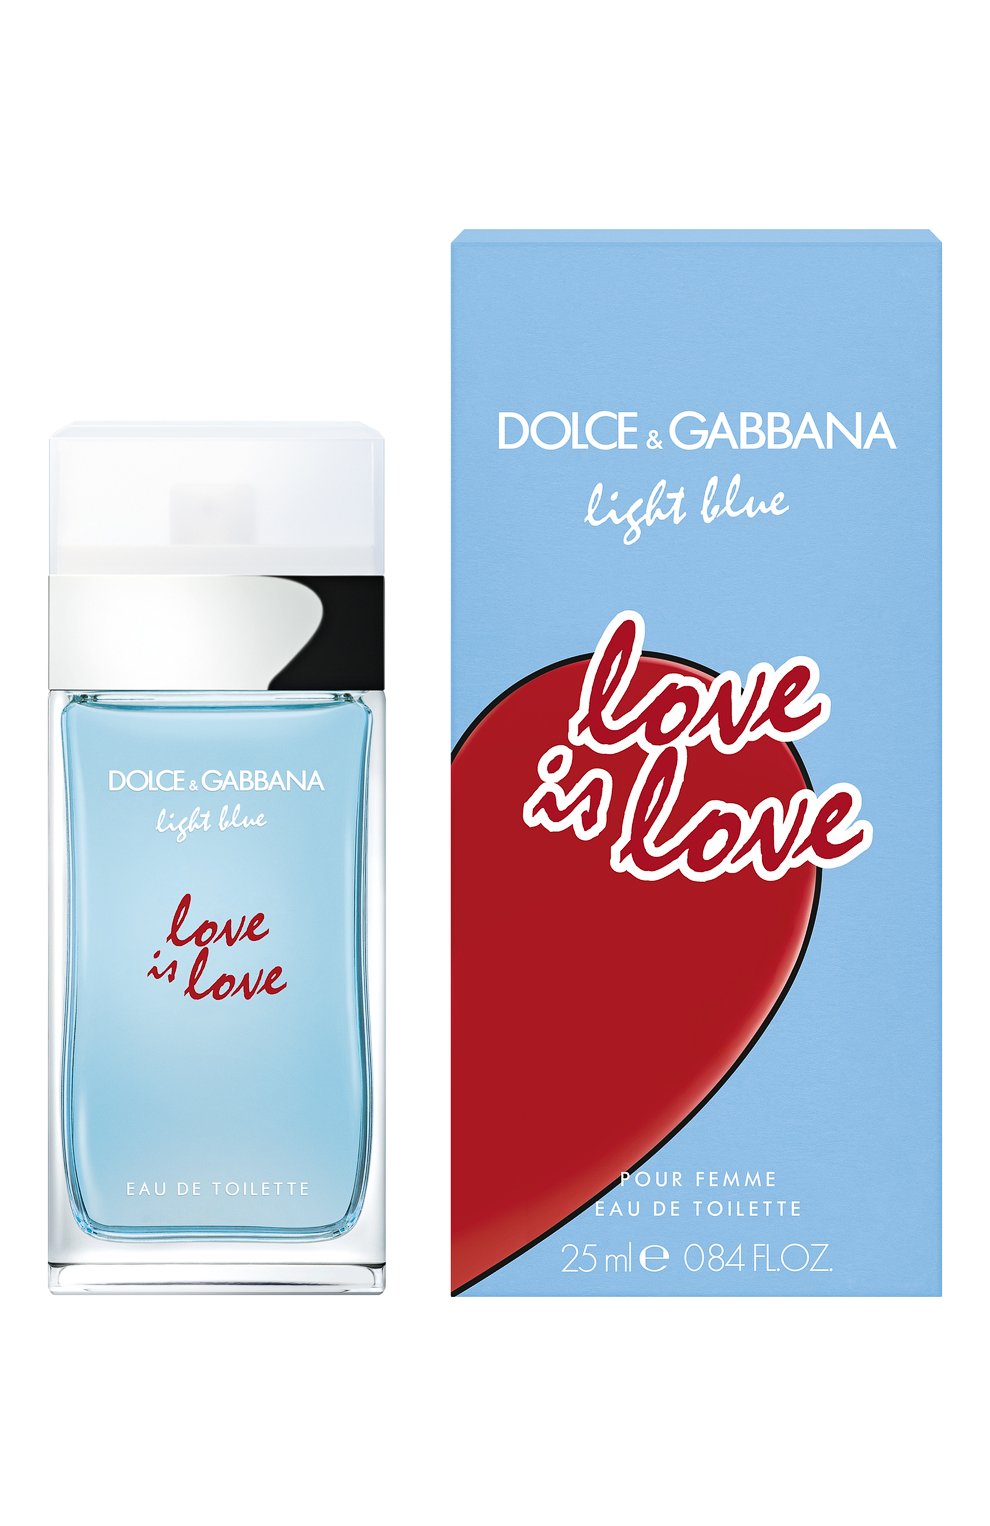 dolce and gabbana is from which country